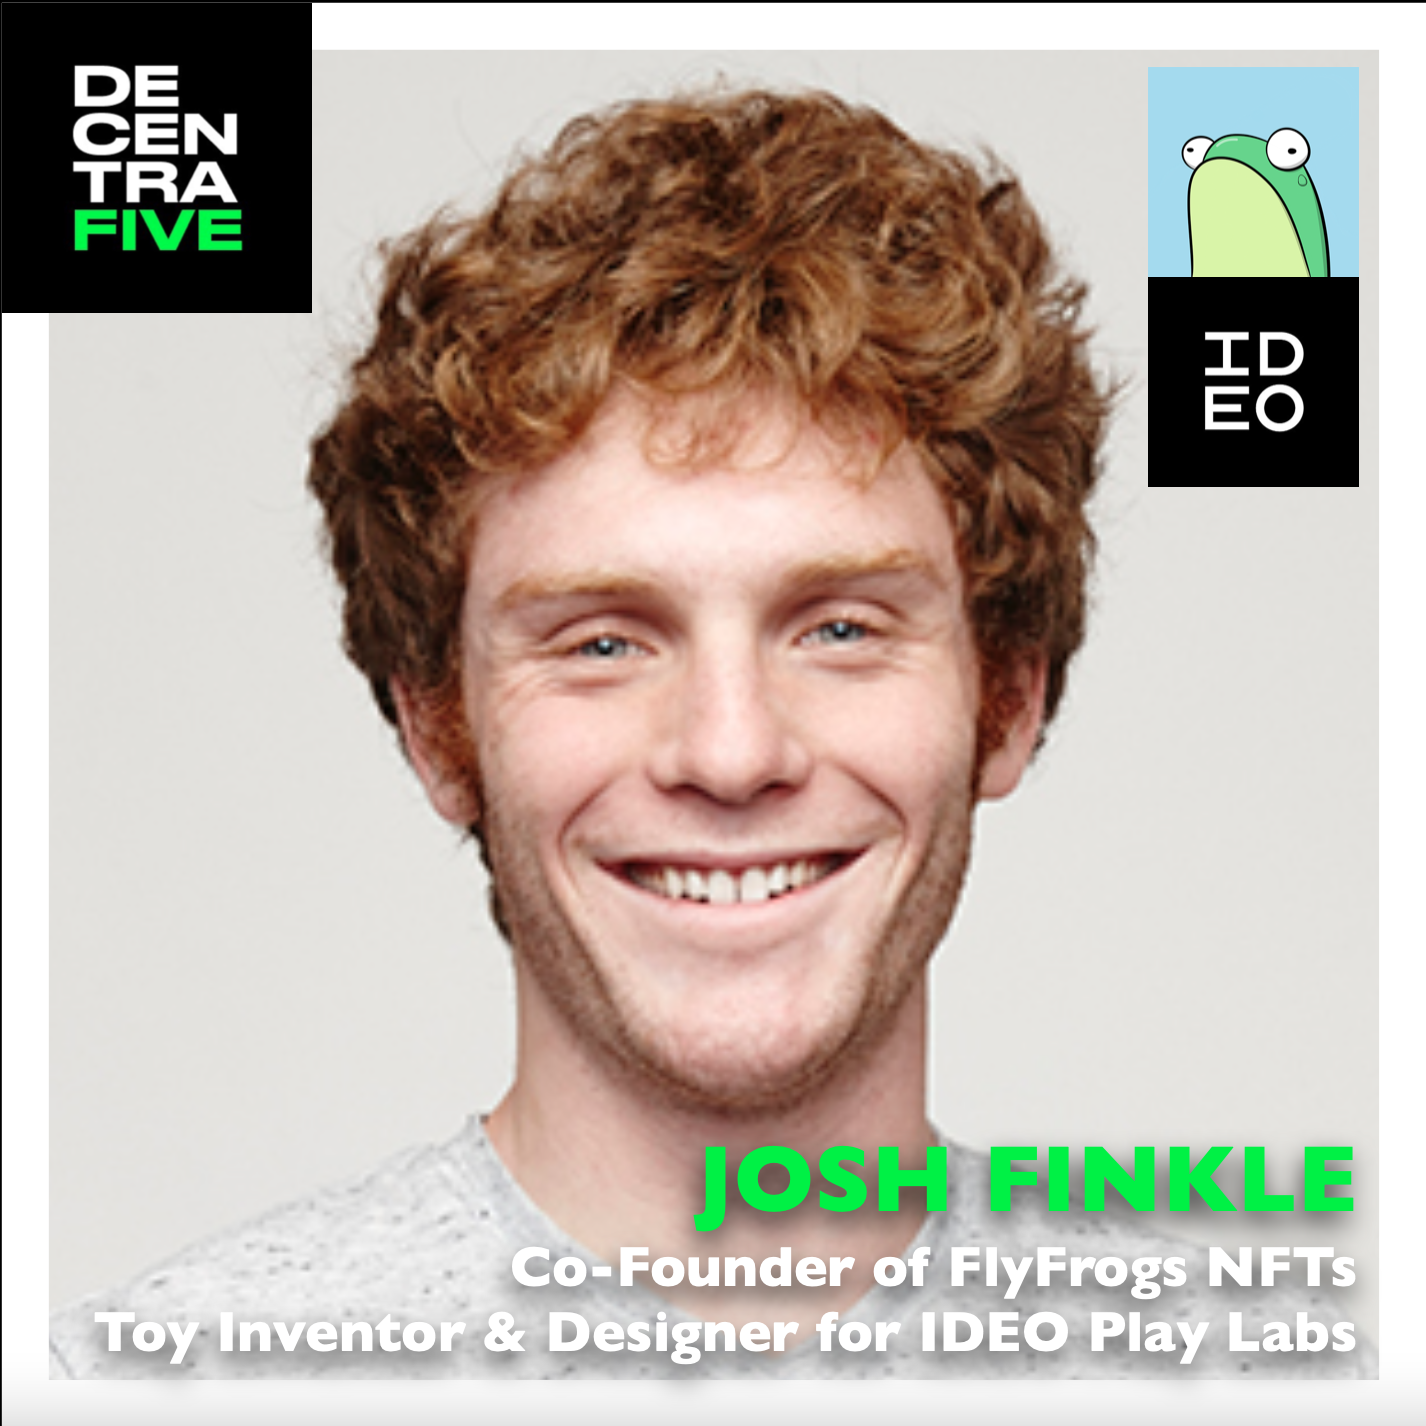 Josh Finkle | Co-Founder of the @FlyFrogsNFT Project | Toy Inventor & Designer for @IDEO Play Labs | on @DECENTRAFIVE hosted by @LiveSent